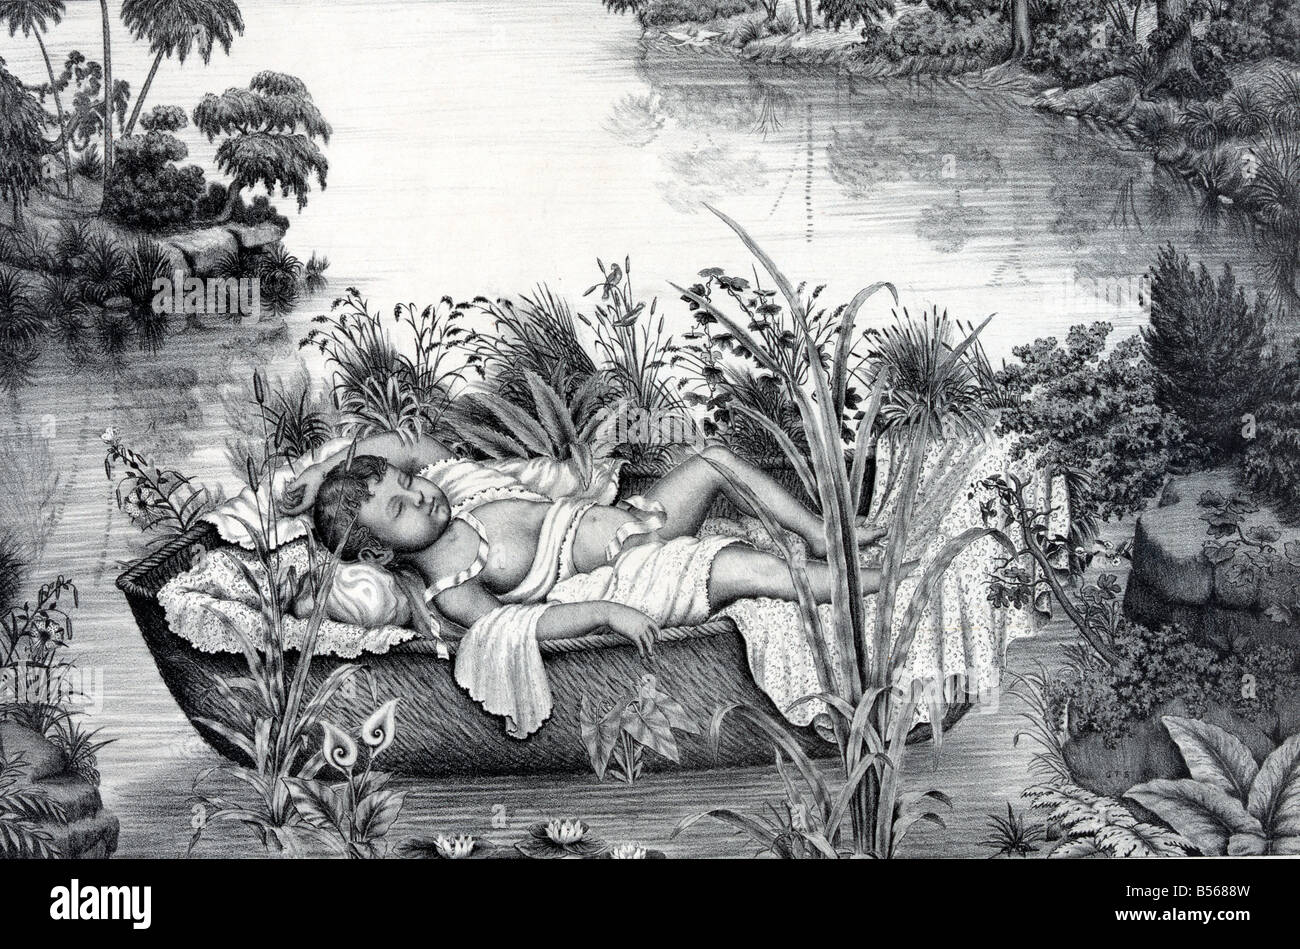 Print showing Moses as an infant floating in a basket on a river. Stock Photo